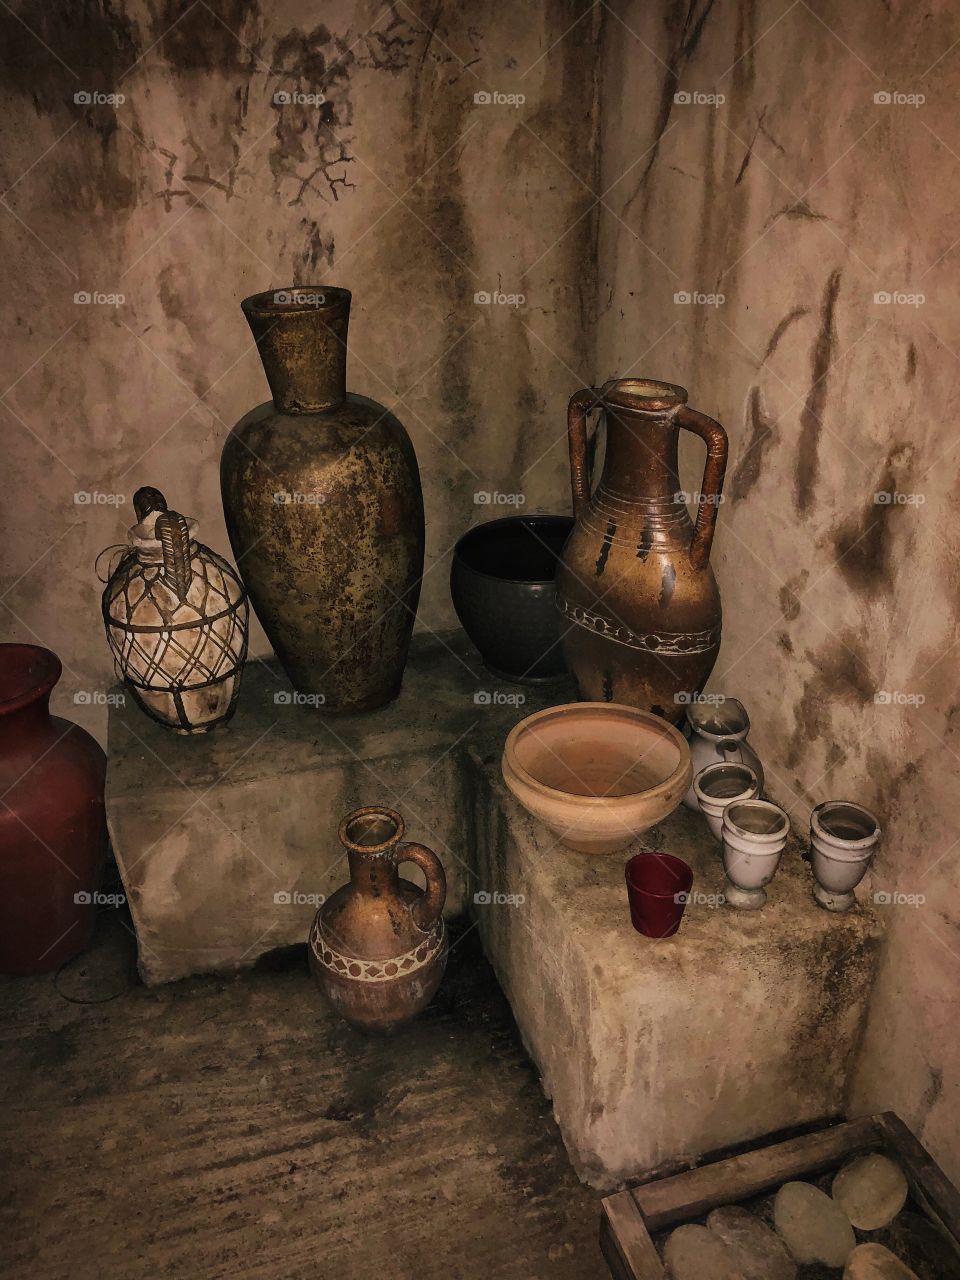 Culture- hand made vases, pots, pottery 